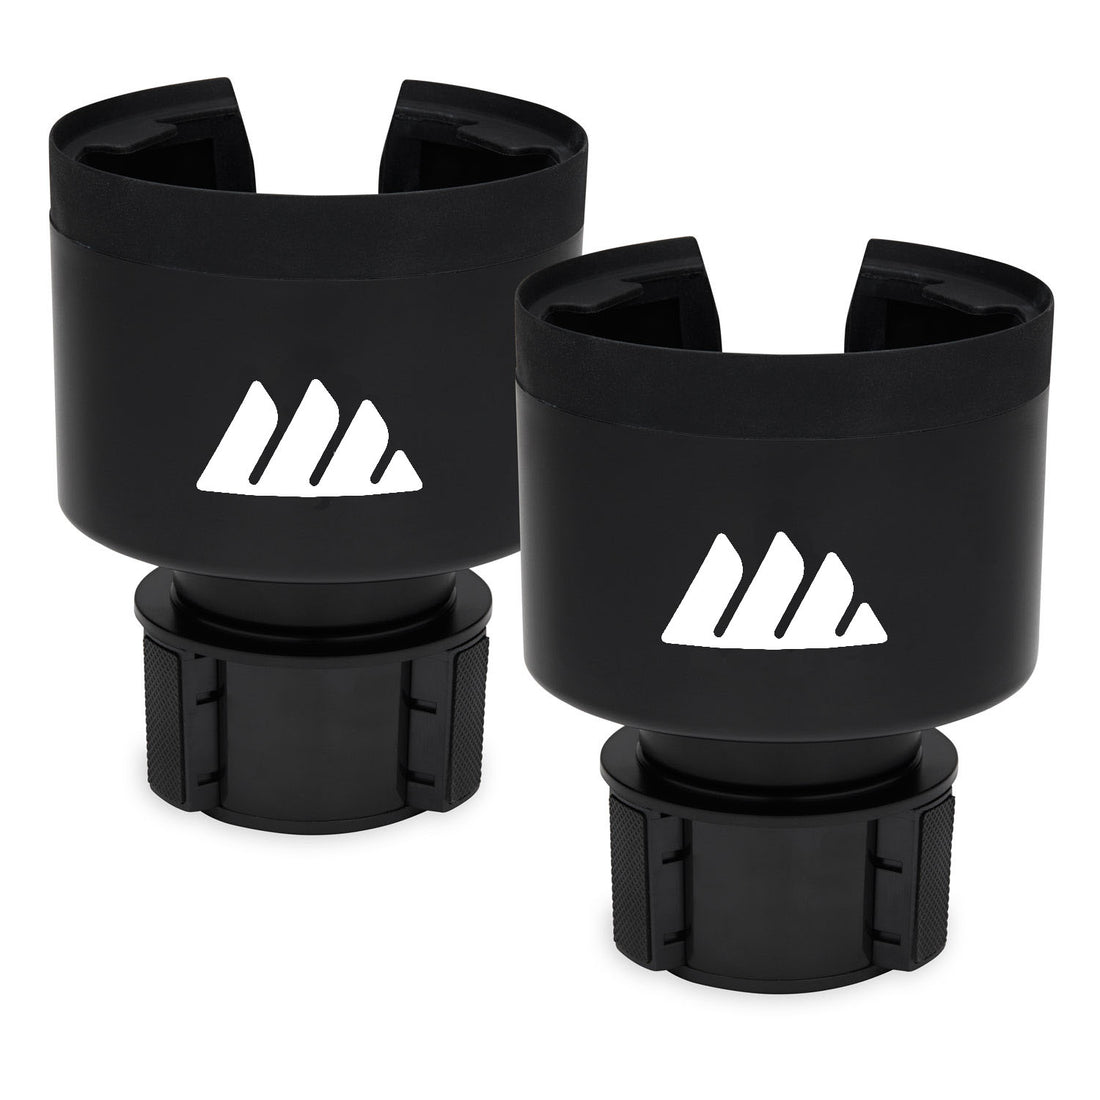 ULTIMATE EXPANDER® - Expandable Cup Holder up to 4.0"